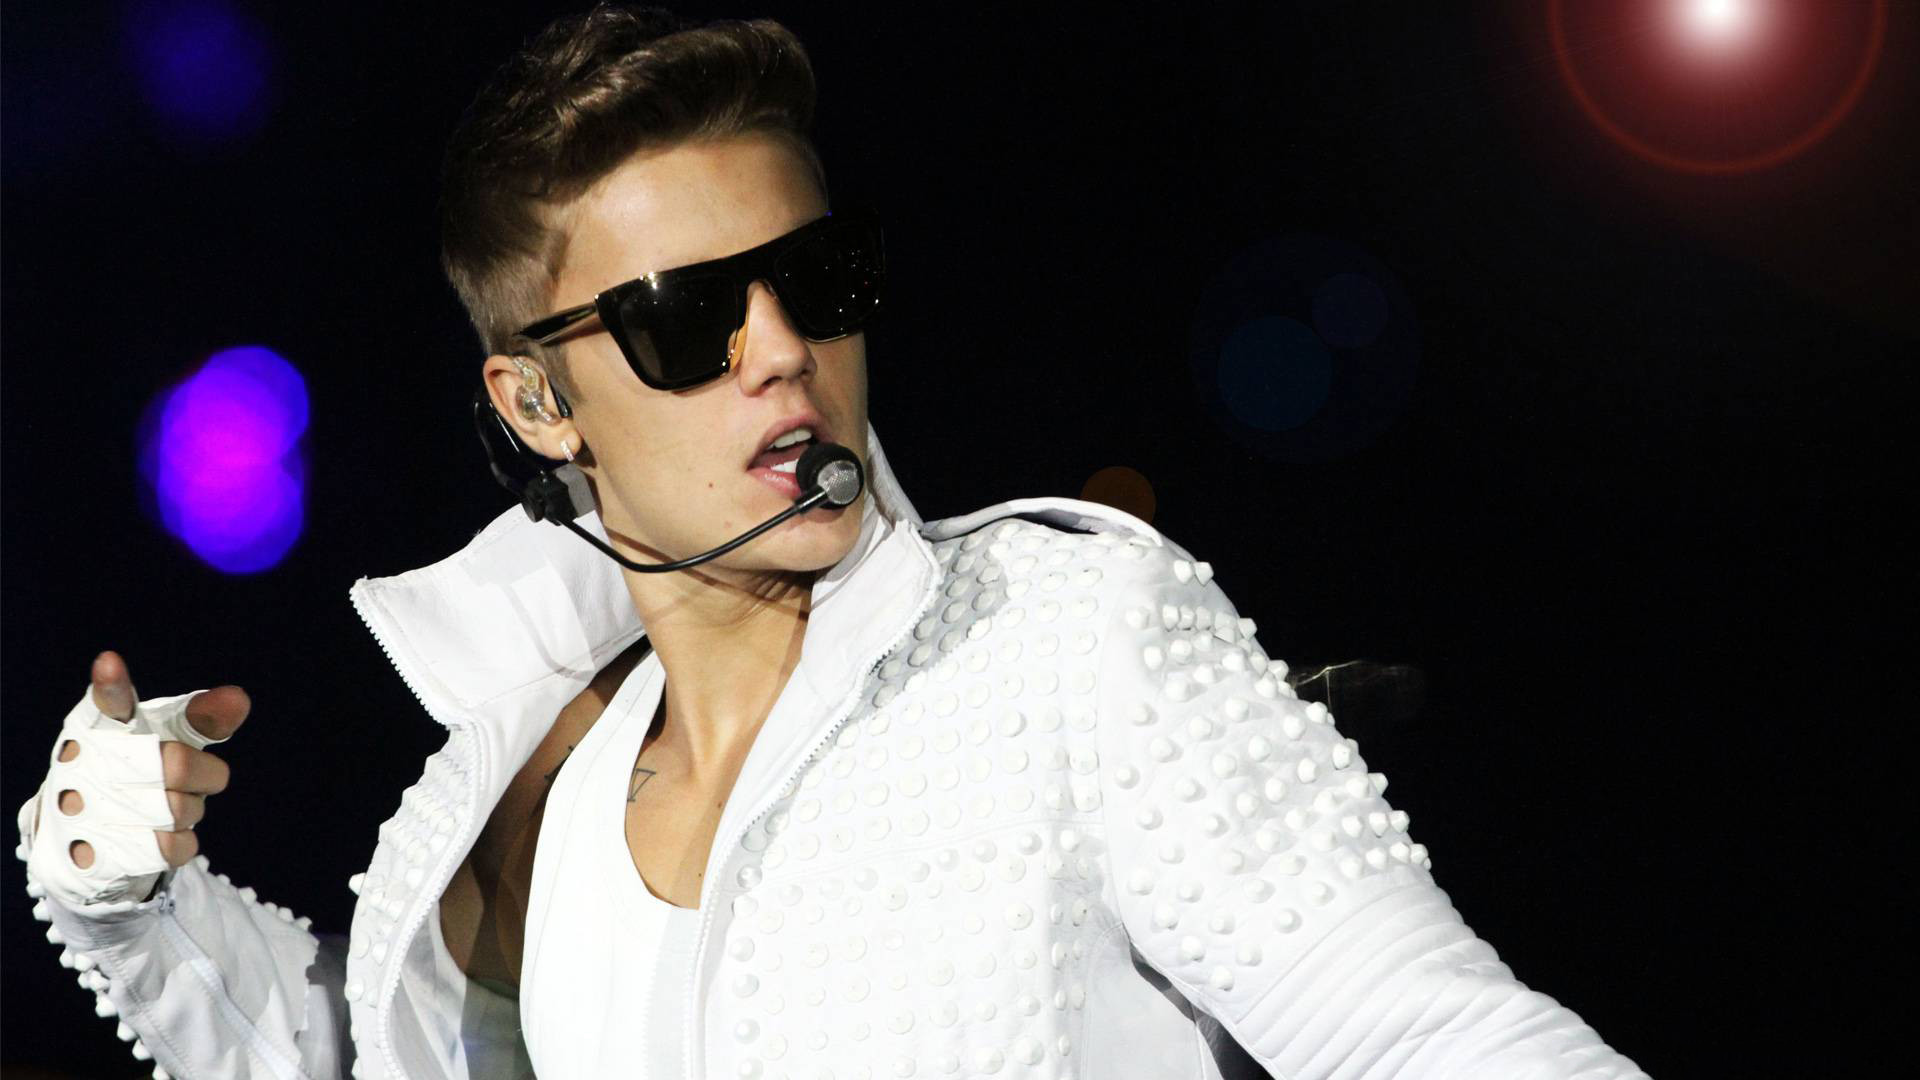 1920x1080 Wallpapers Of Justin Bieber (70 Wallpapers) – HD Wallpapers